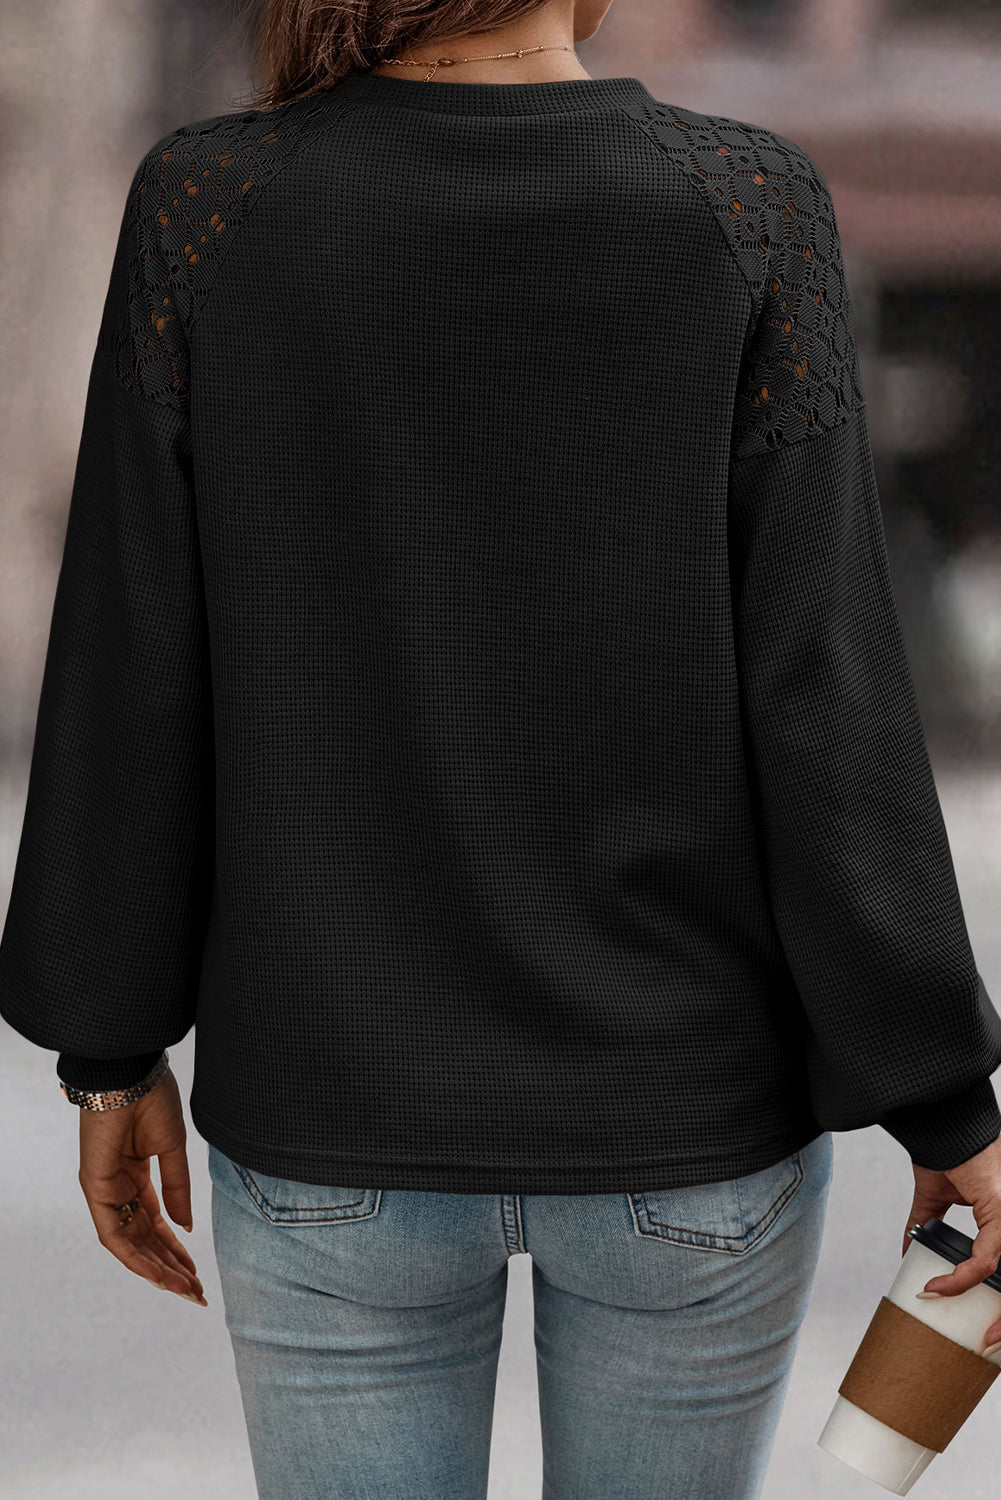 Black Lace Long Sleeve Textured Casual Top, Womens Shirts